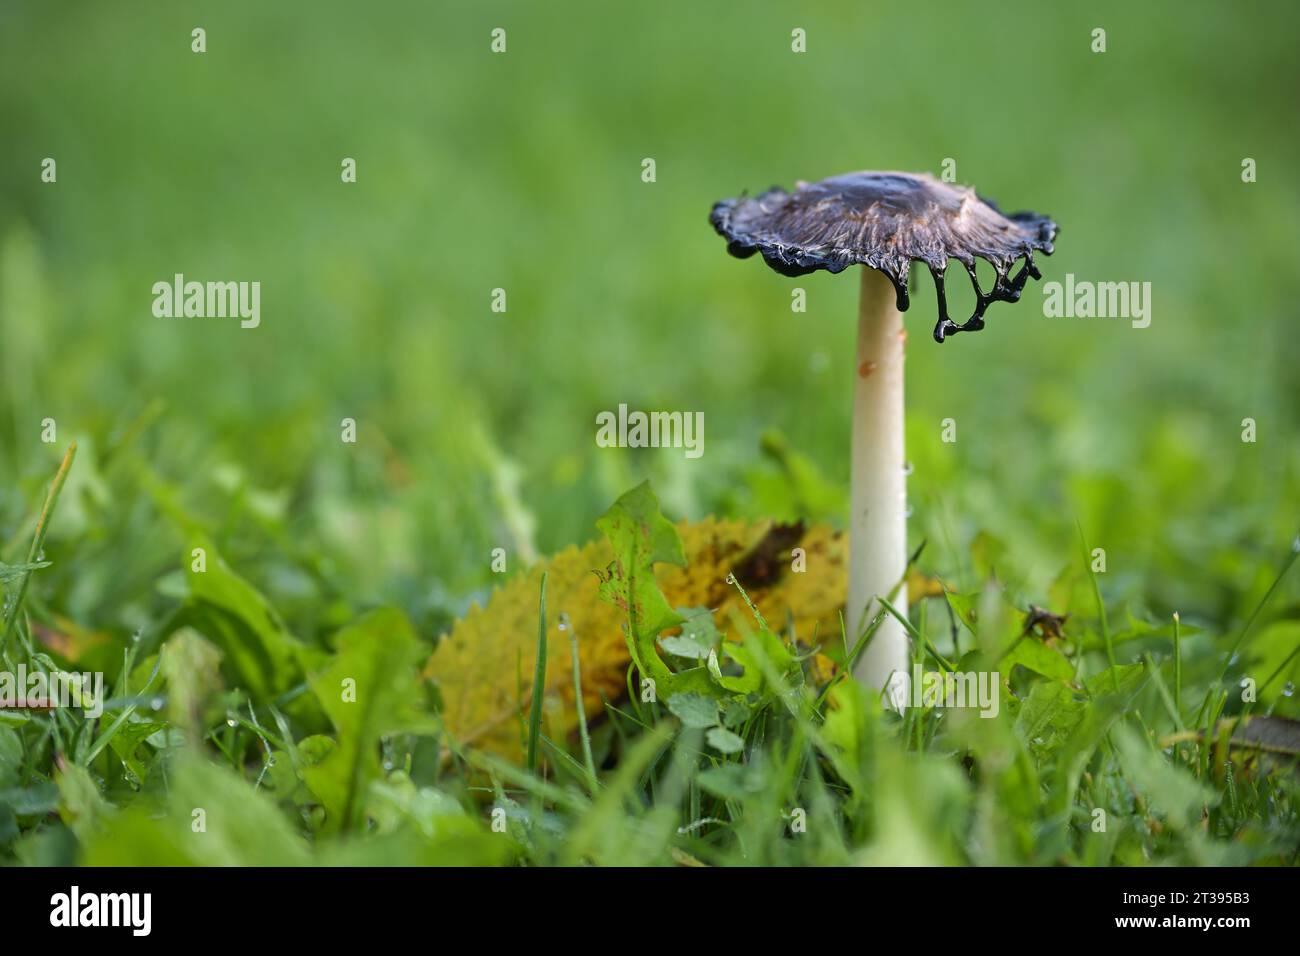 Shaggy ink cap fungus (Coprinus comatus) growing in a green meadow, the gills beneath the cap deliquescing ore melting into a black liquid filled with Stock Photo